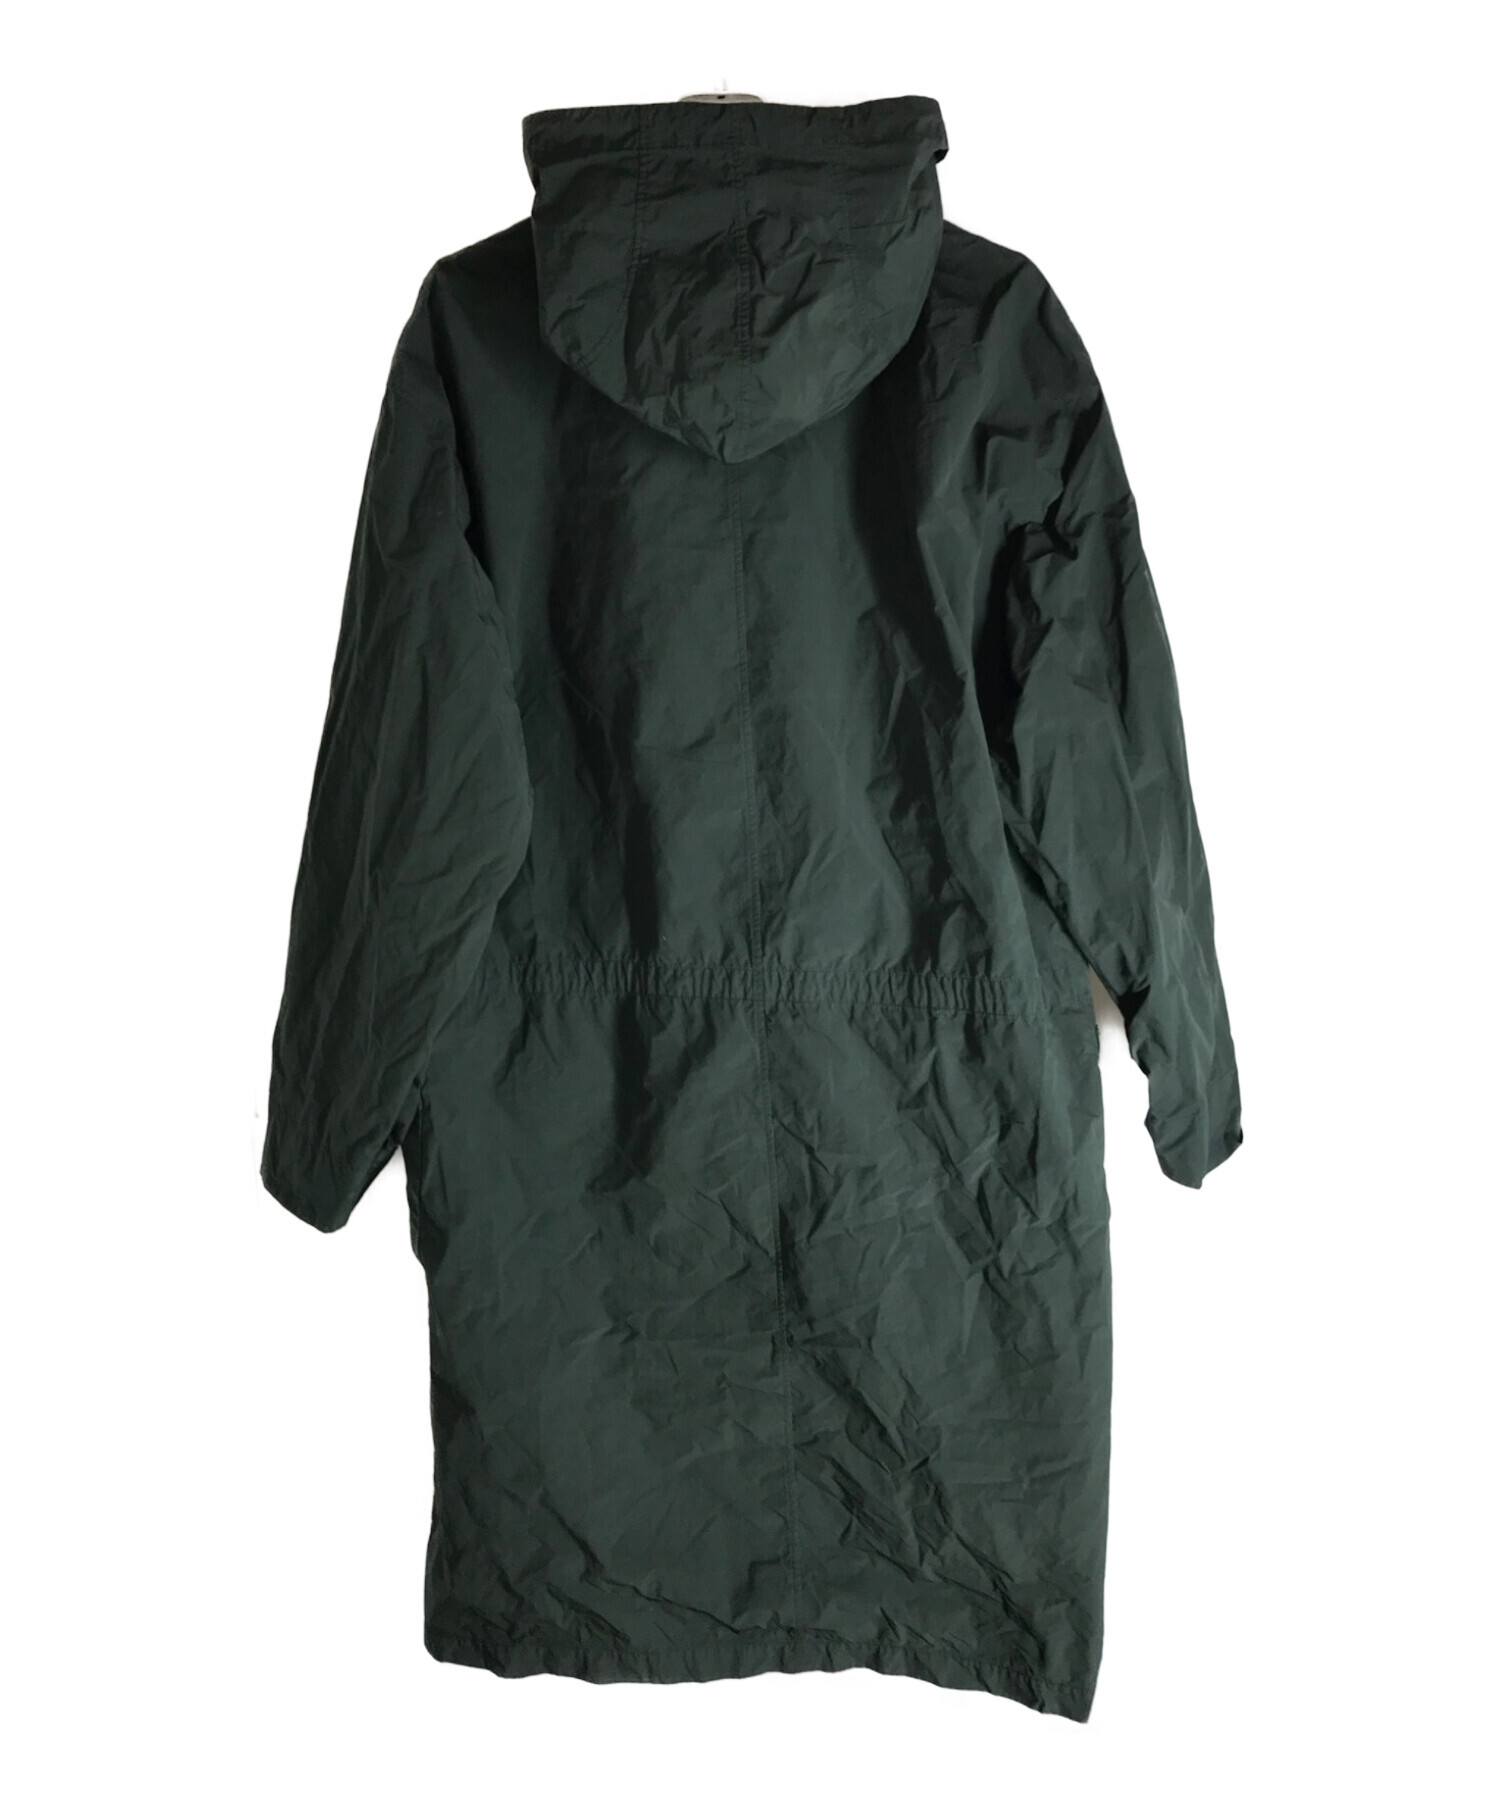 ATON NATURAL DYE AIR VENTILE コート | camillevieraservices.com